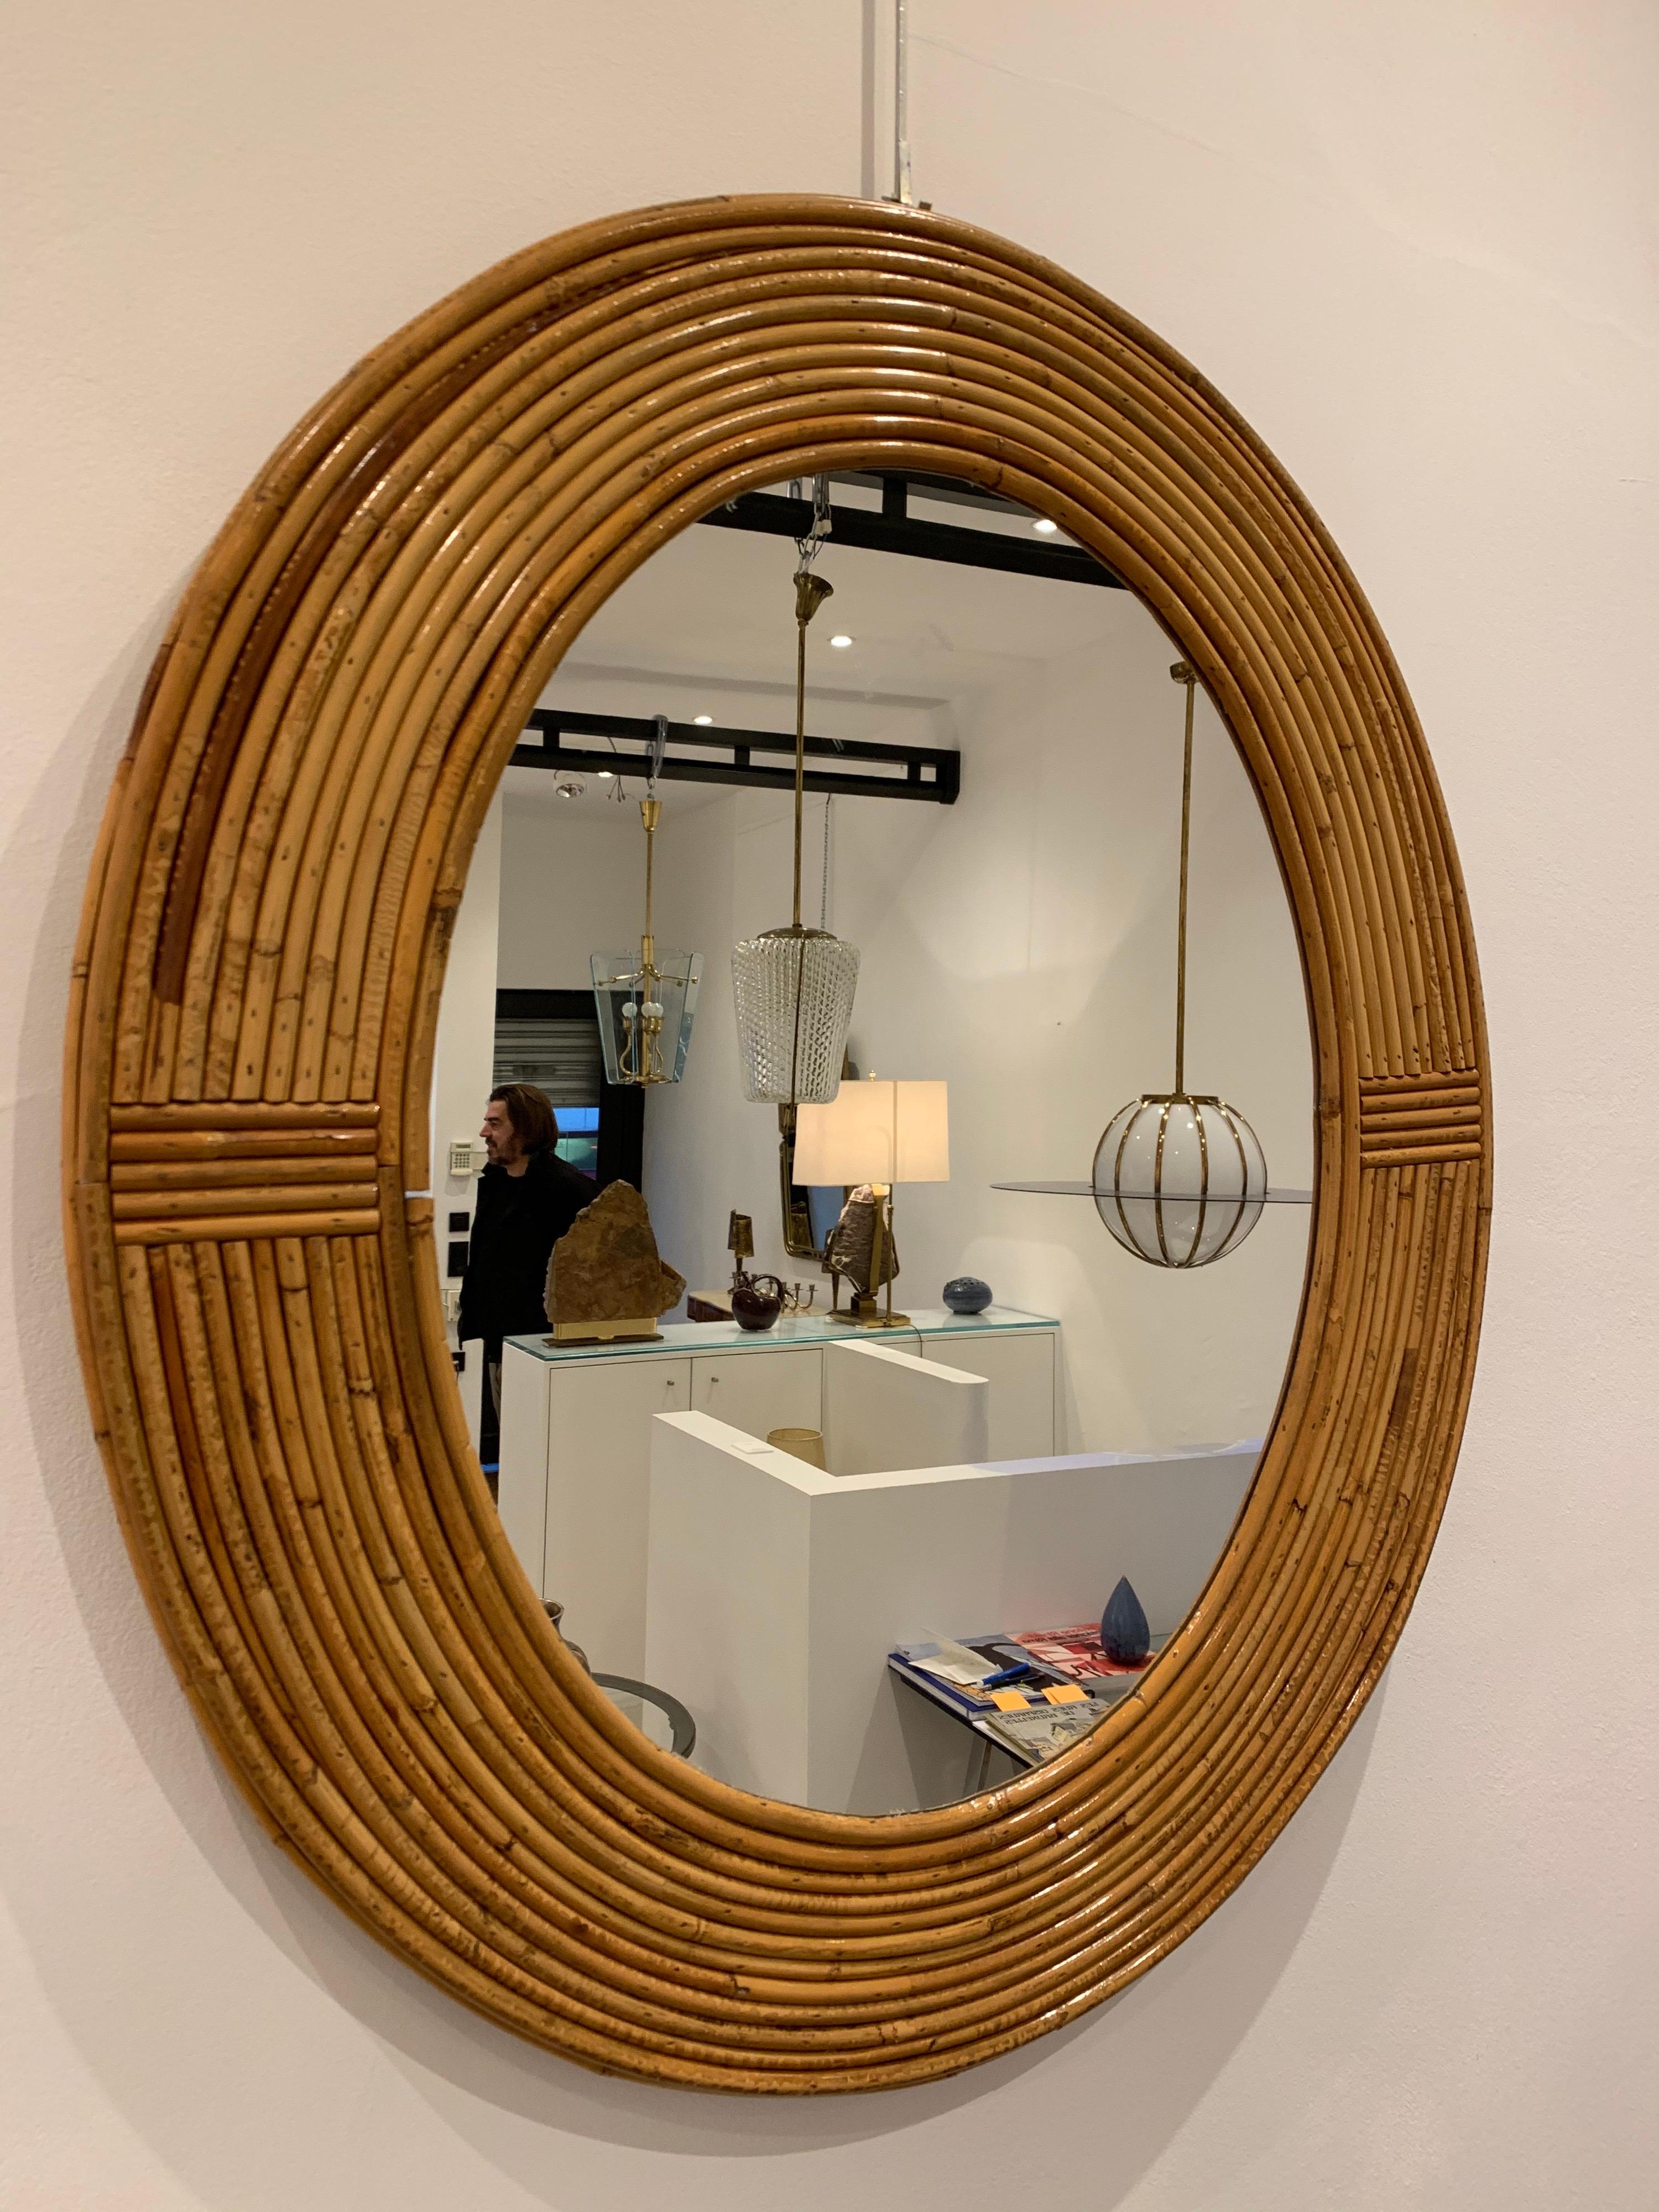 Vivai Del Sud is an Italian furniture company which designed and produced furniture in Rattan and Bamboo. 

The present mirror dates circa 1960s. This type of mirror is typical of the trend for rattan furniture in the 1960s-1970s. 

Famous